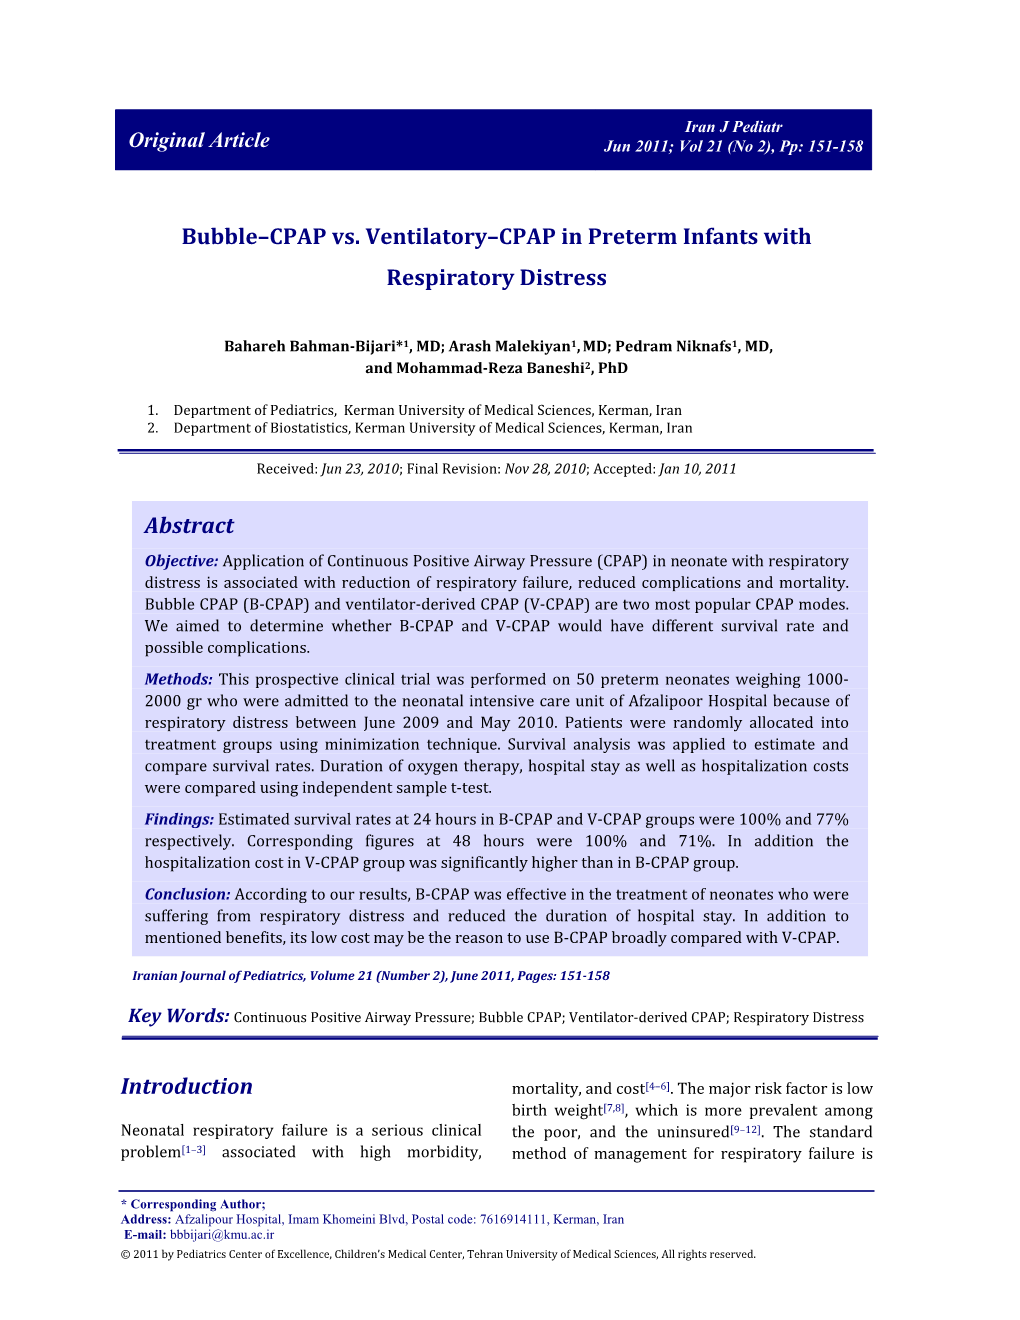 Bubble–CPAP Vs. Ventilatory–CPAP in Preterm Infants with Respiratory Distress